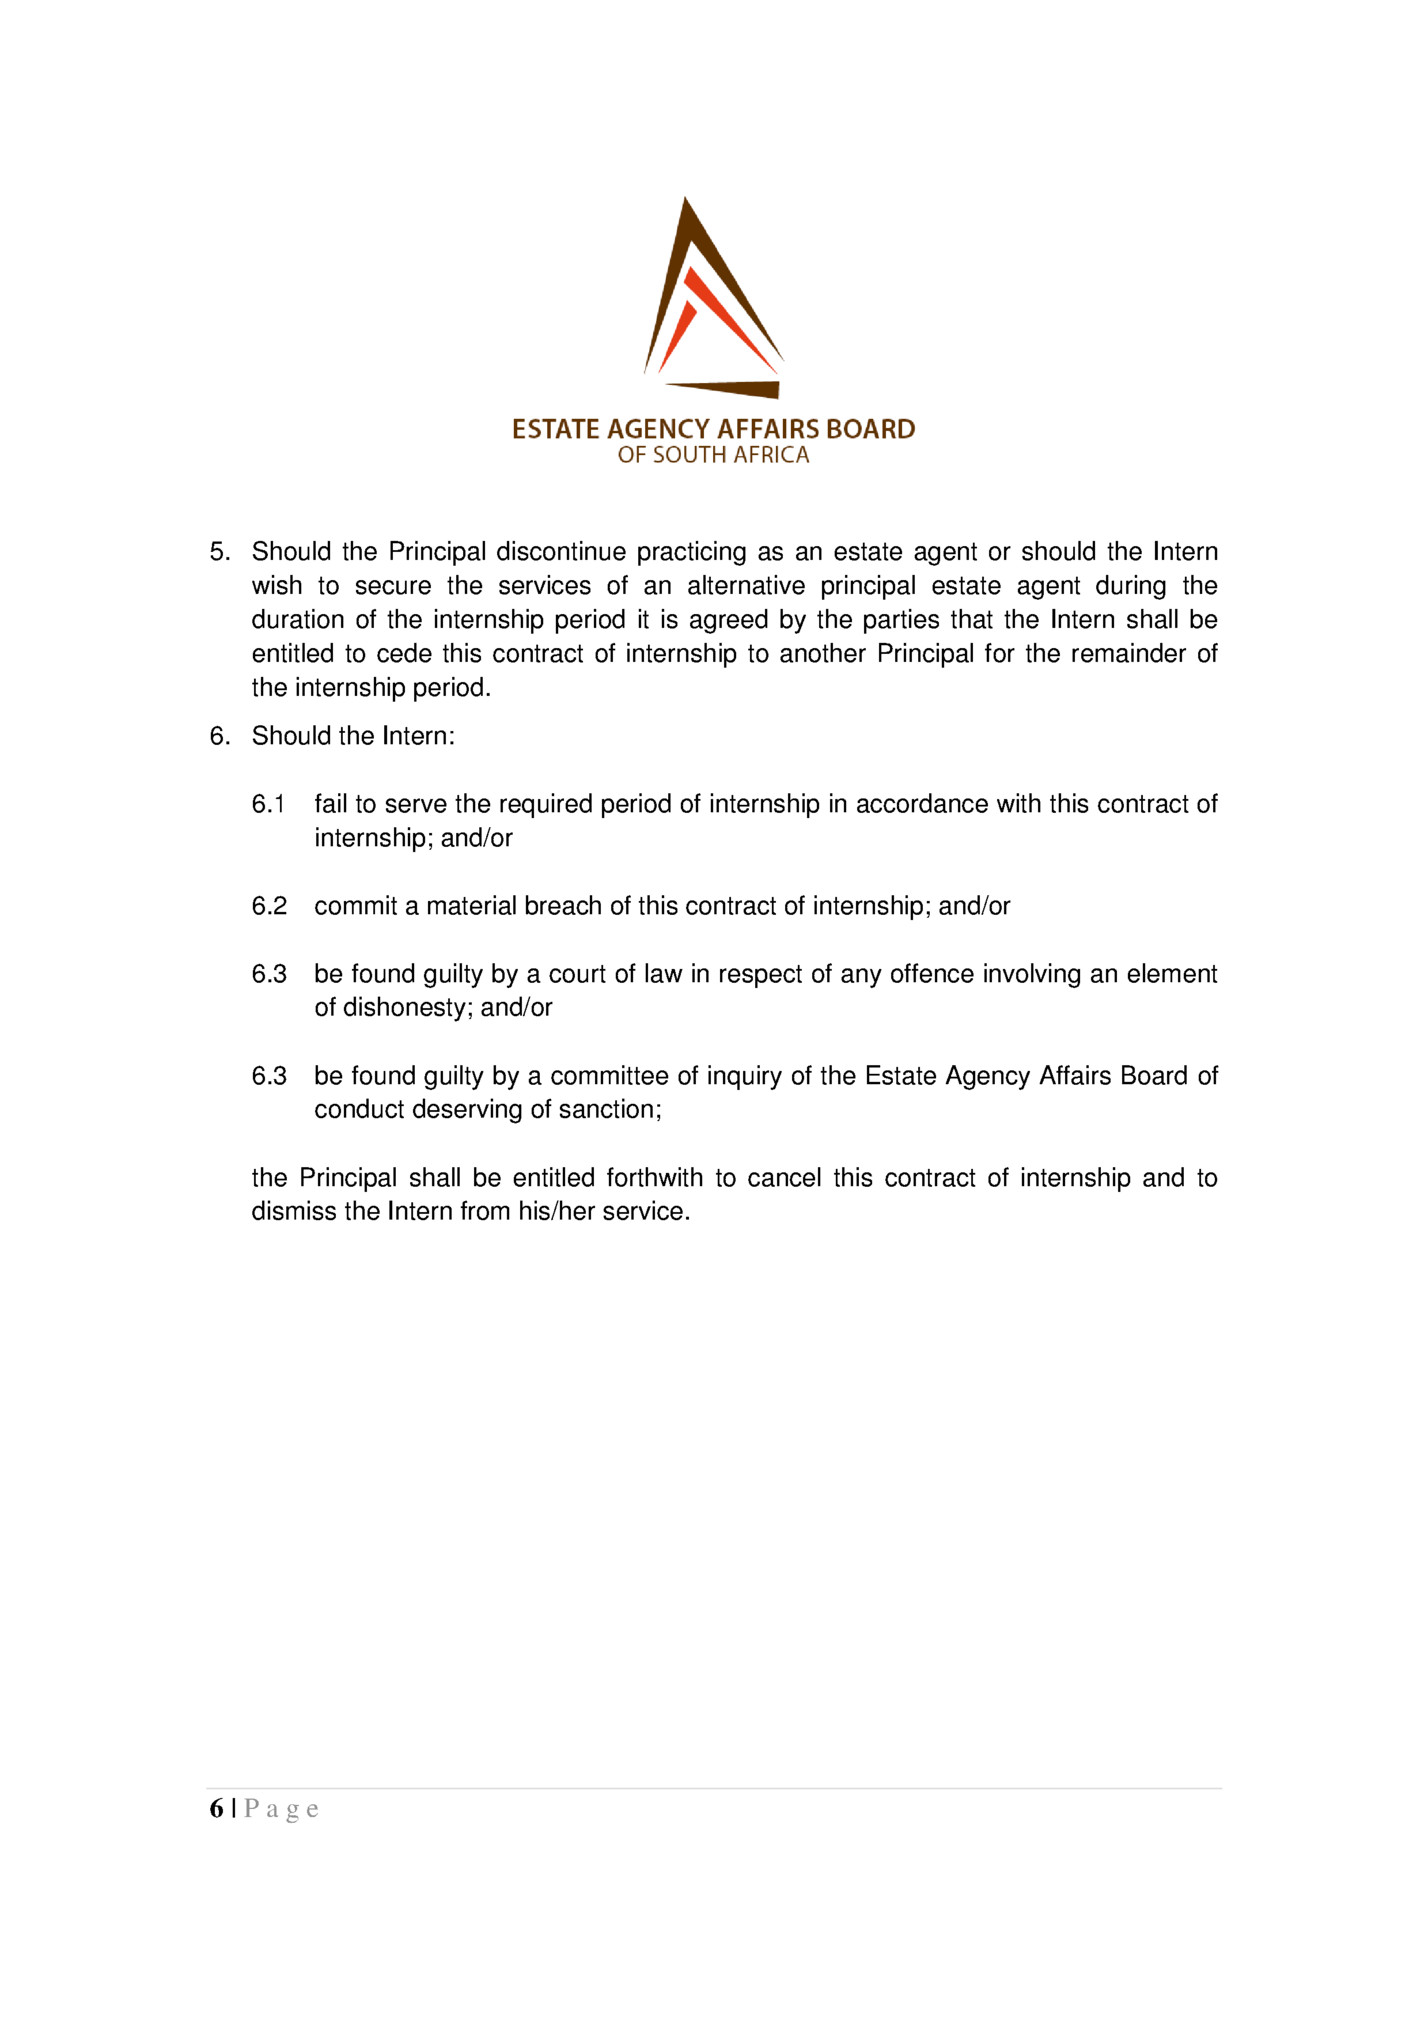 5. Should the Principal discontinue practicing as an estate agent or should the Intern